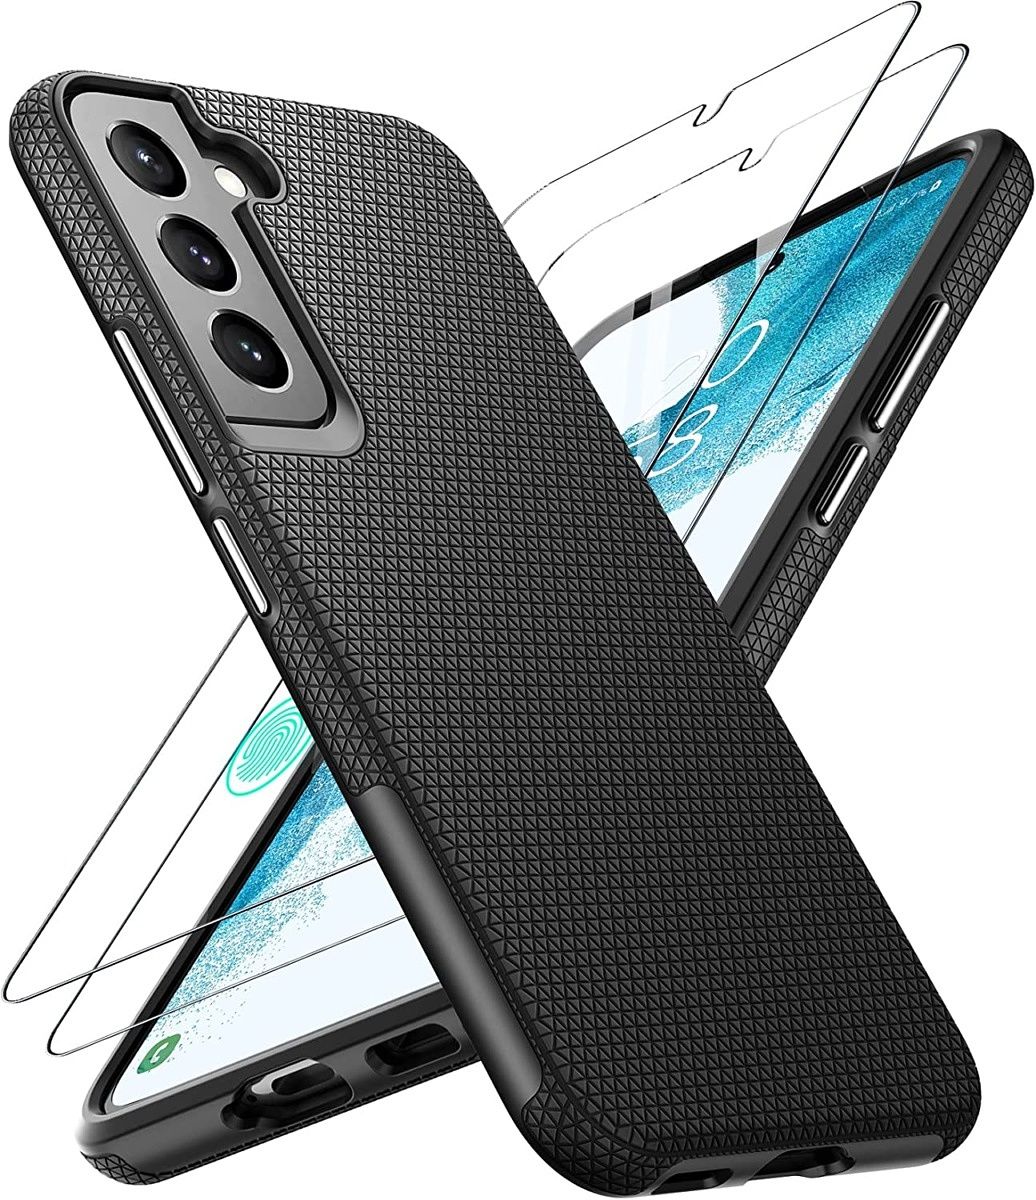 Temdan's thin protective case protects your Galaxy S22 from all critical areas without adding too much bulk. It also has raised edges to protect the camera module and a flexible rubber bumper.